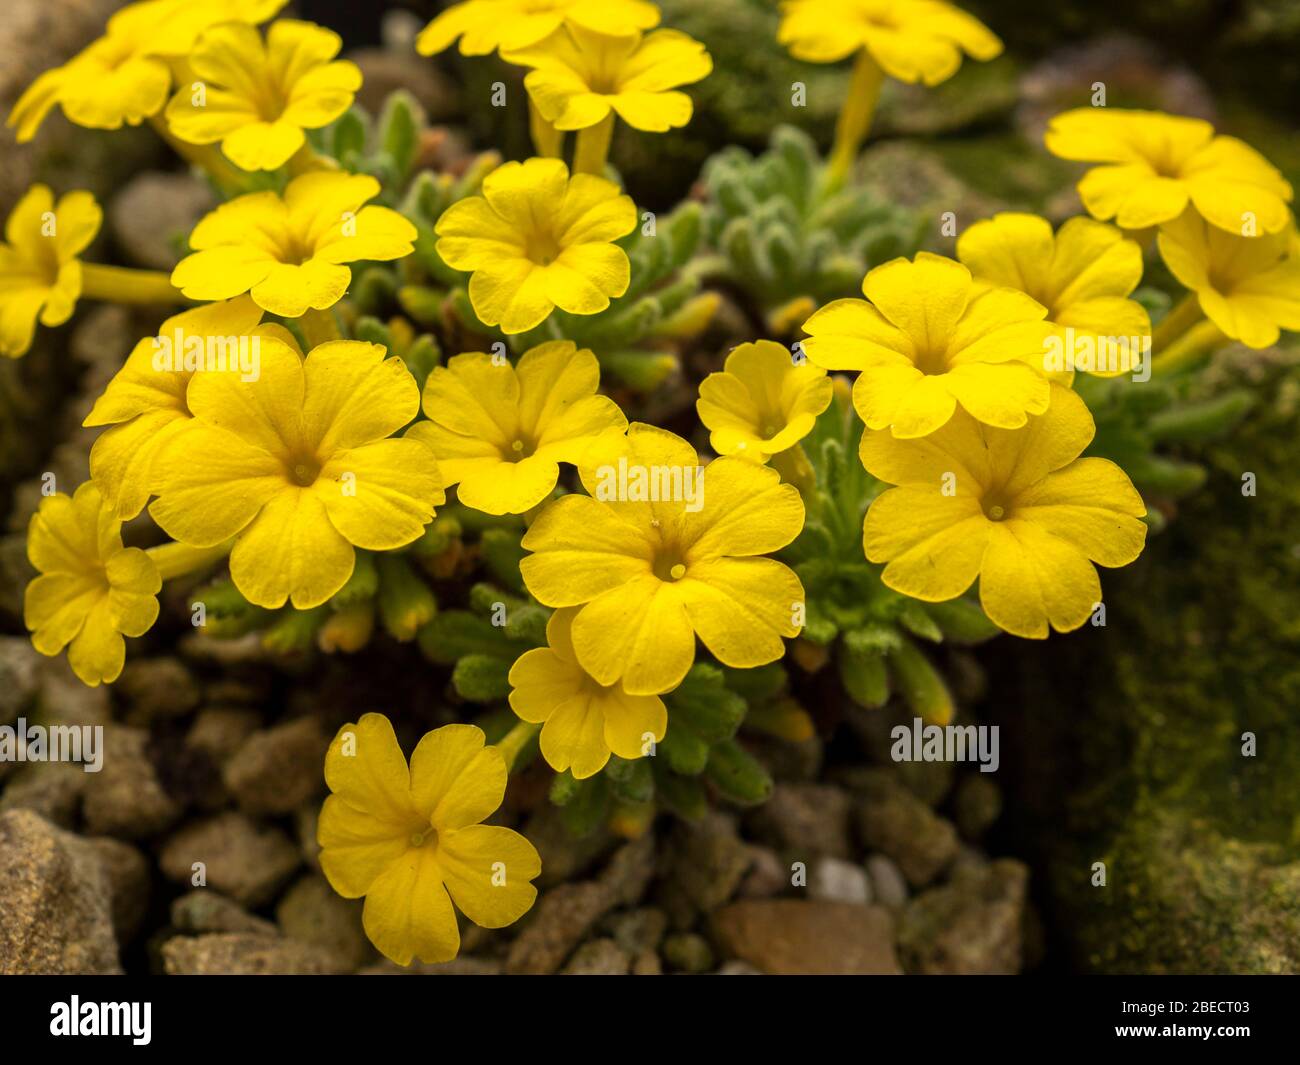 Bright yellow flowers of an alpine plant, Dionysia aretioides, in a rockery garden Stock Photo